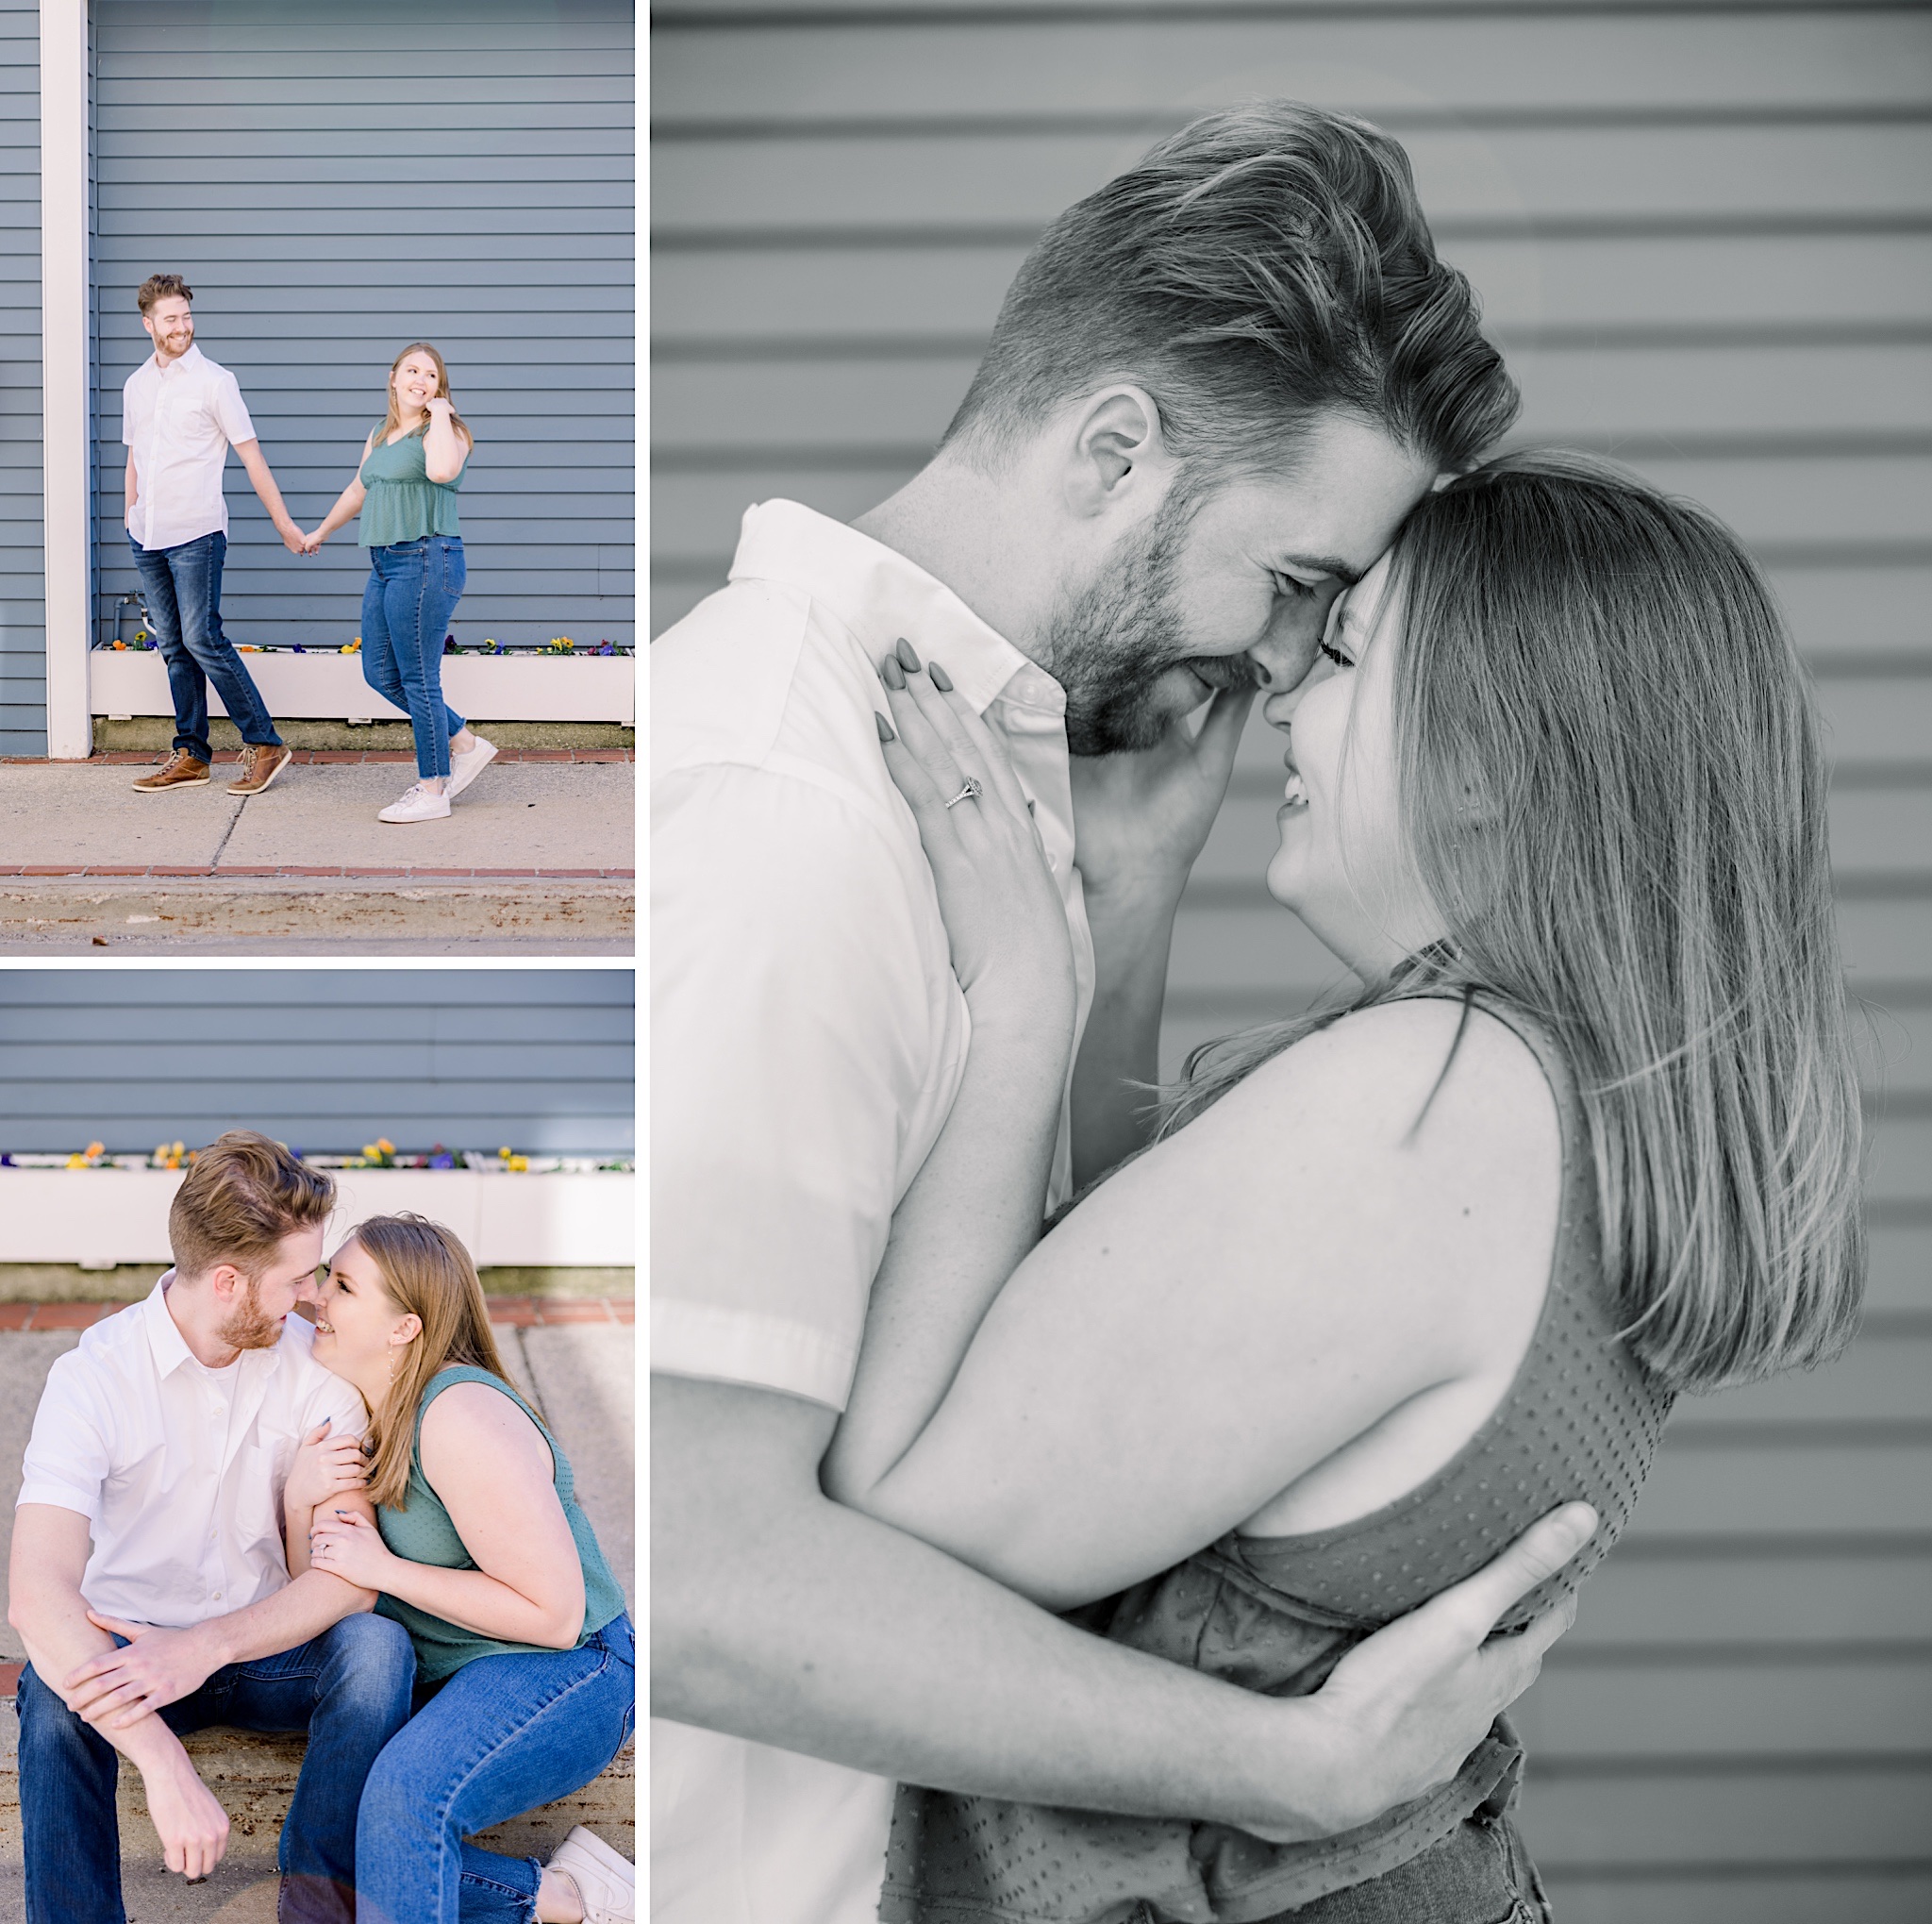 Bride and groom share an embrace downtown Harbor Springs during their Harbor Springs Engagement Session.